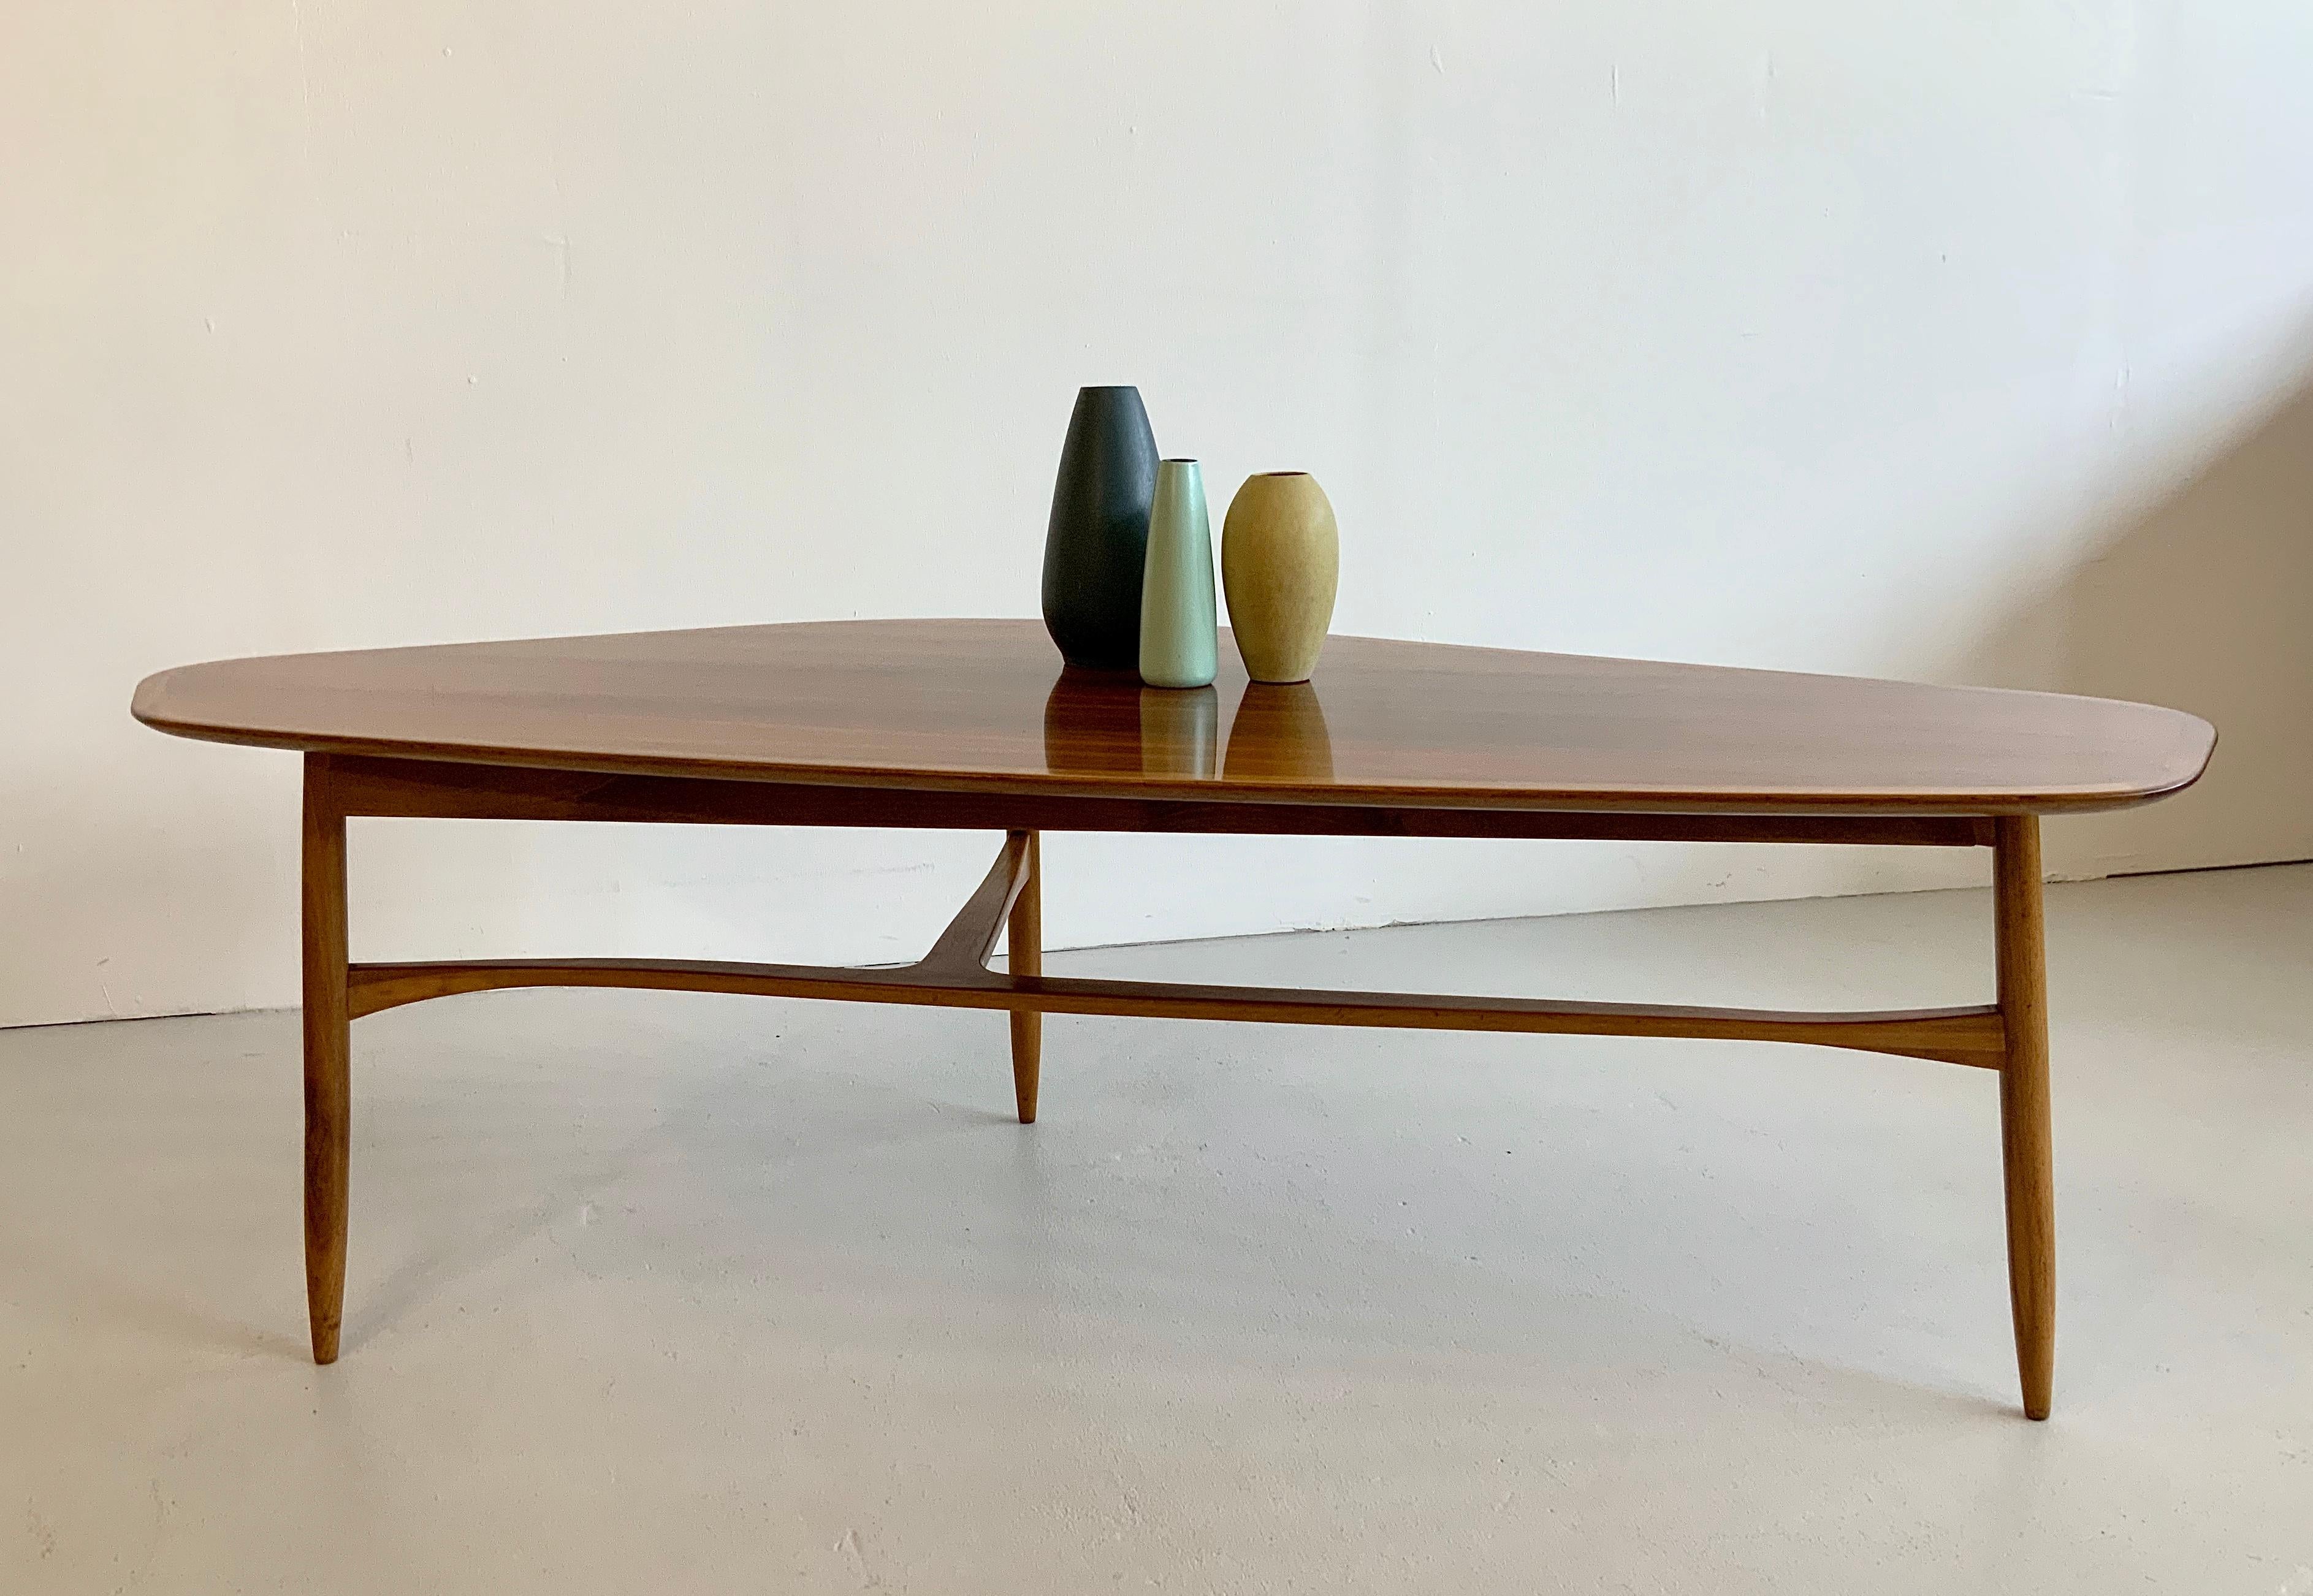 This Scandinavian Mid-Century Modern design classic was designed in 1950s by Svante Skogh for Laauser in Sweden.
This table is from highest quality, a coveted collectible object and very representative.

The character of this design is timeless